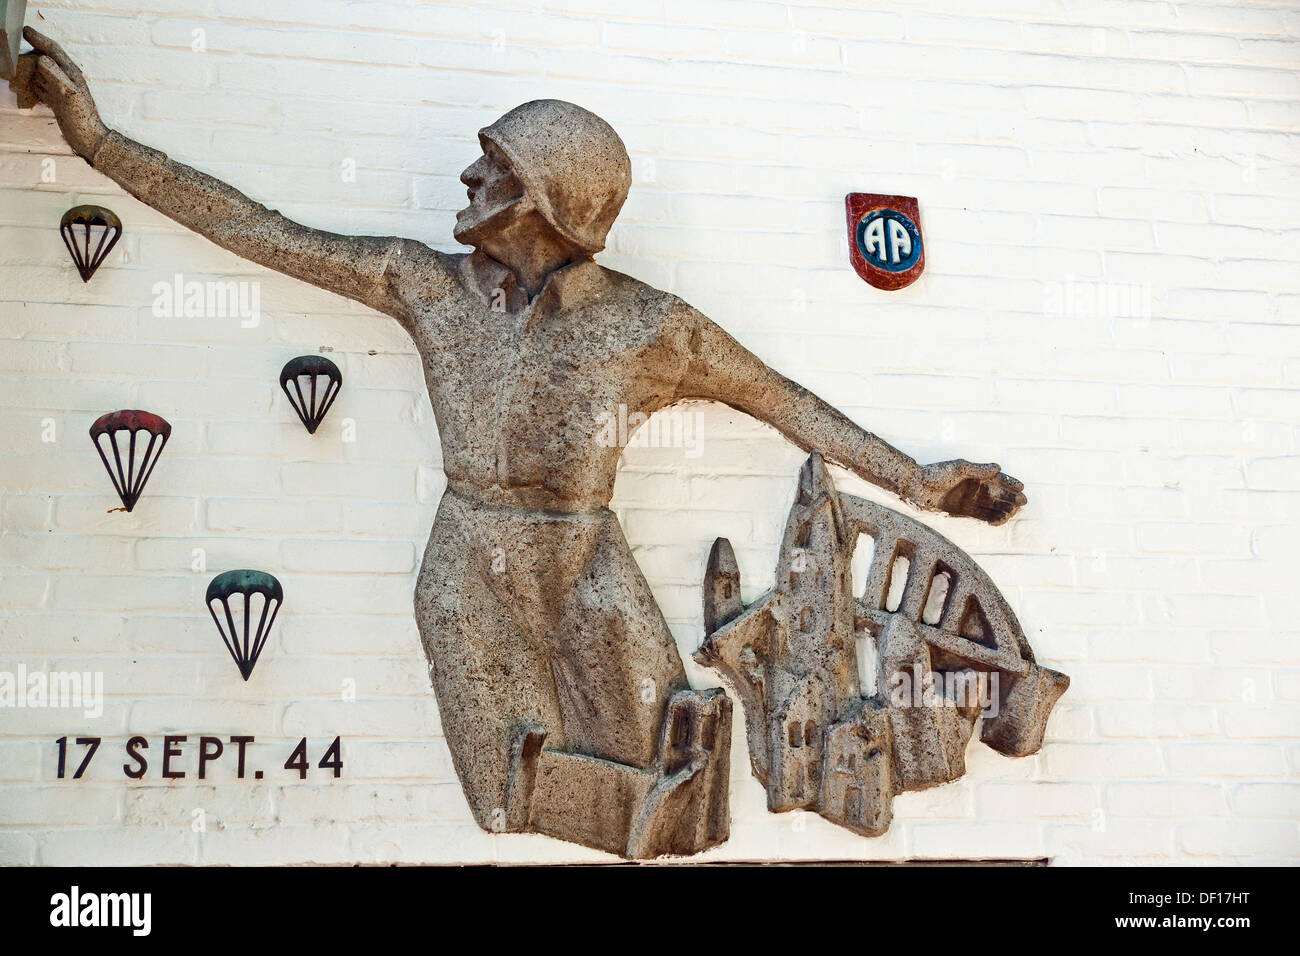 Sculpture on the wall of the Hotel Sion Hof, Nijmegen, marks its use as a Headquarters of the US 82nd Airborne Division in 1944. Stock Photo